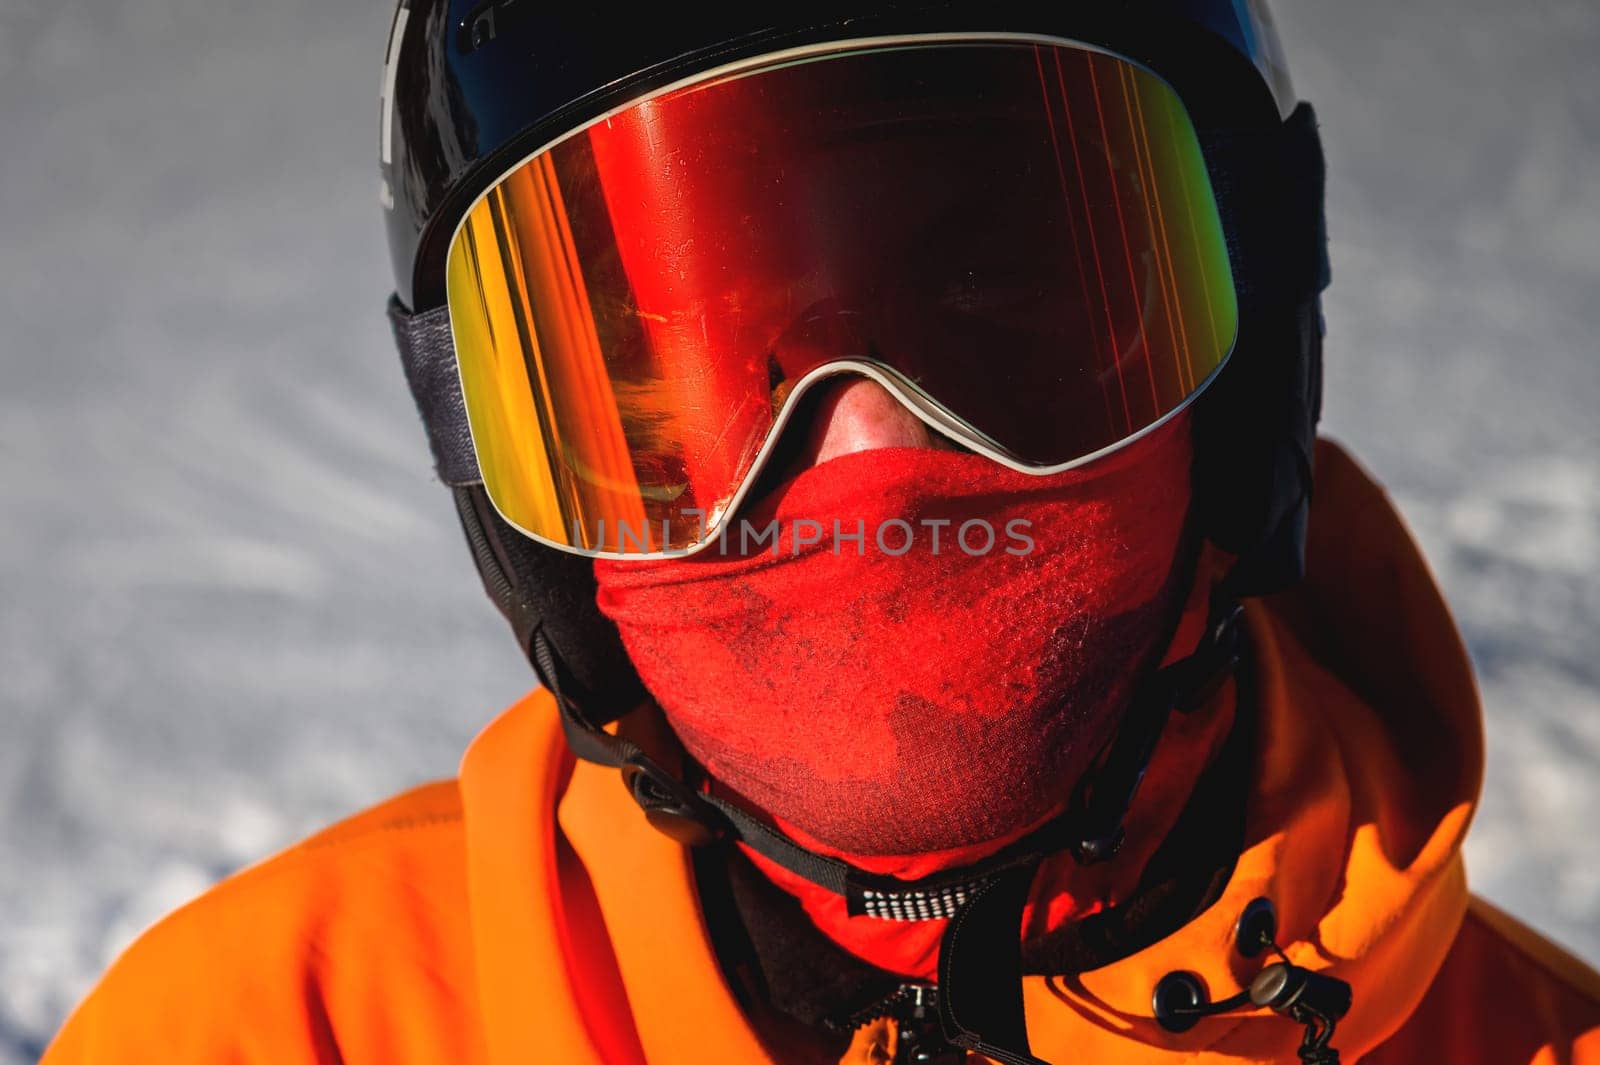 Portrait of a snowboarder. Ski goggles and ski helmet on a man looking at the camera, close-up. Holidays in the ski resort.